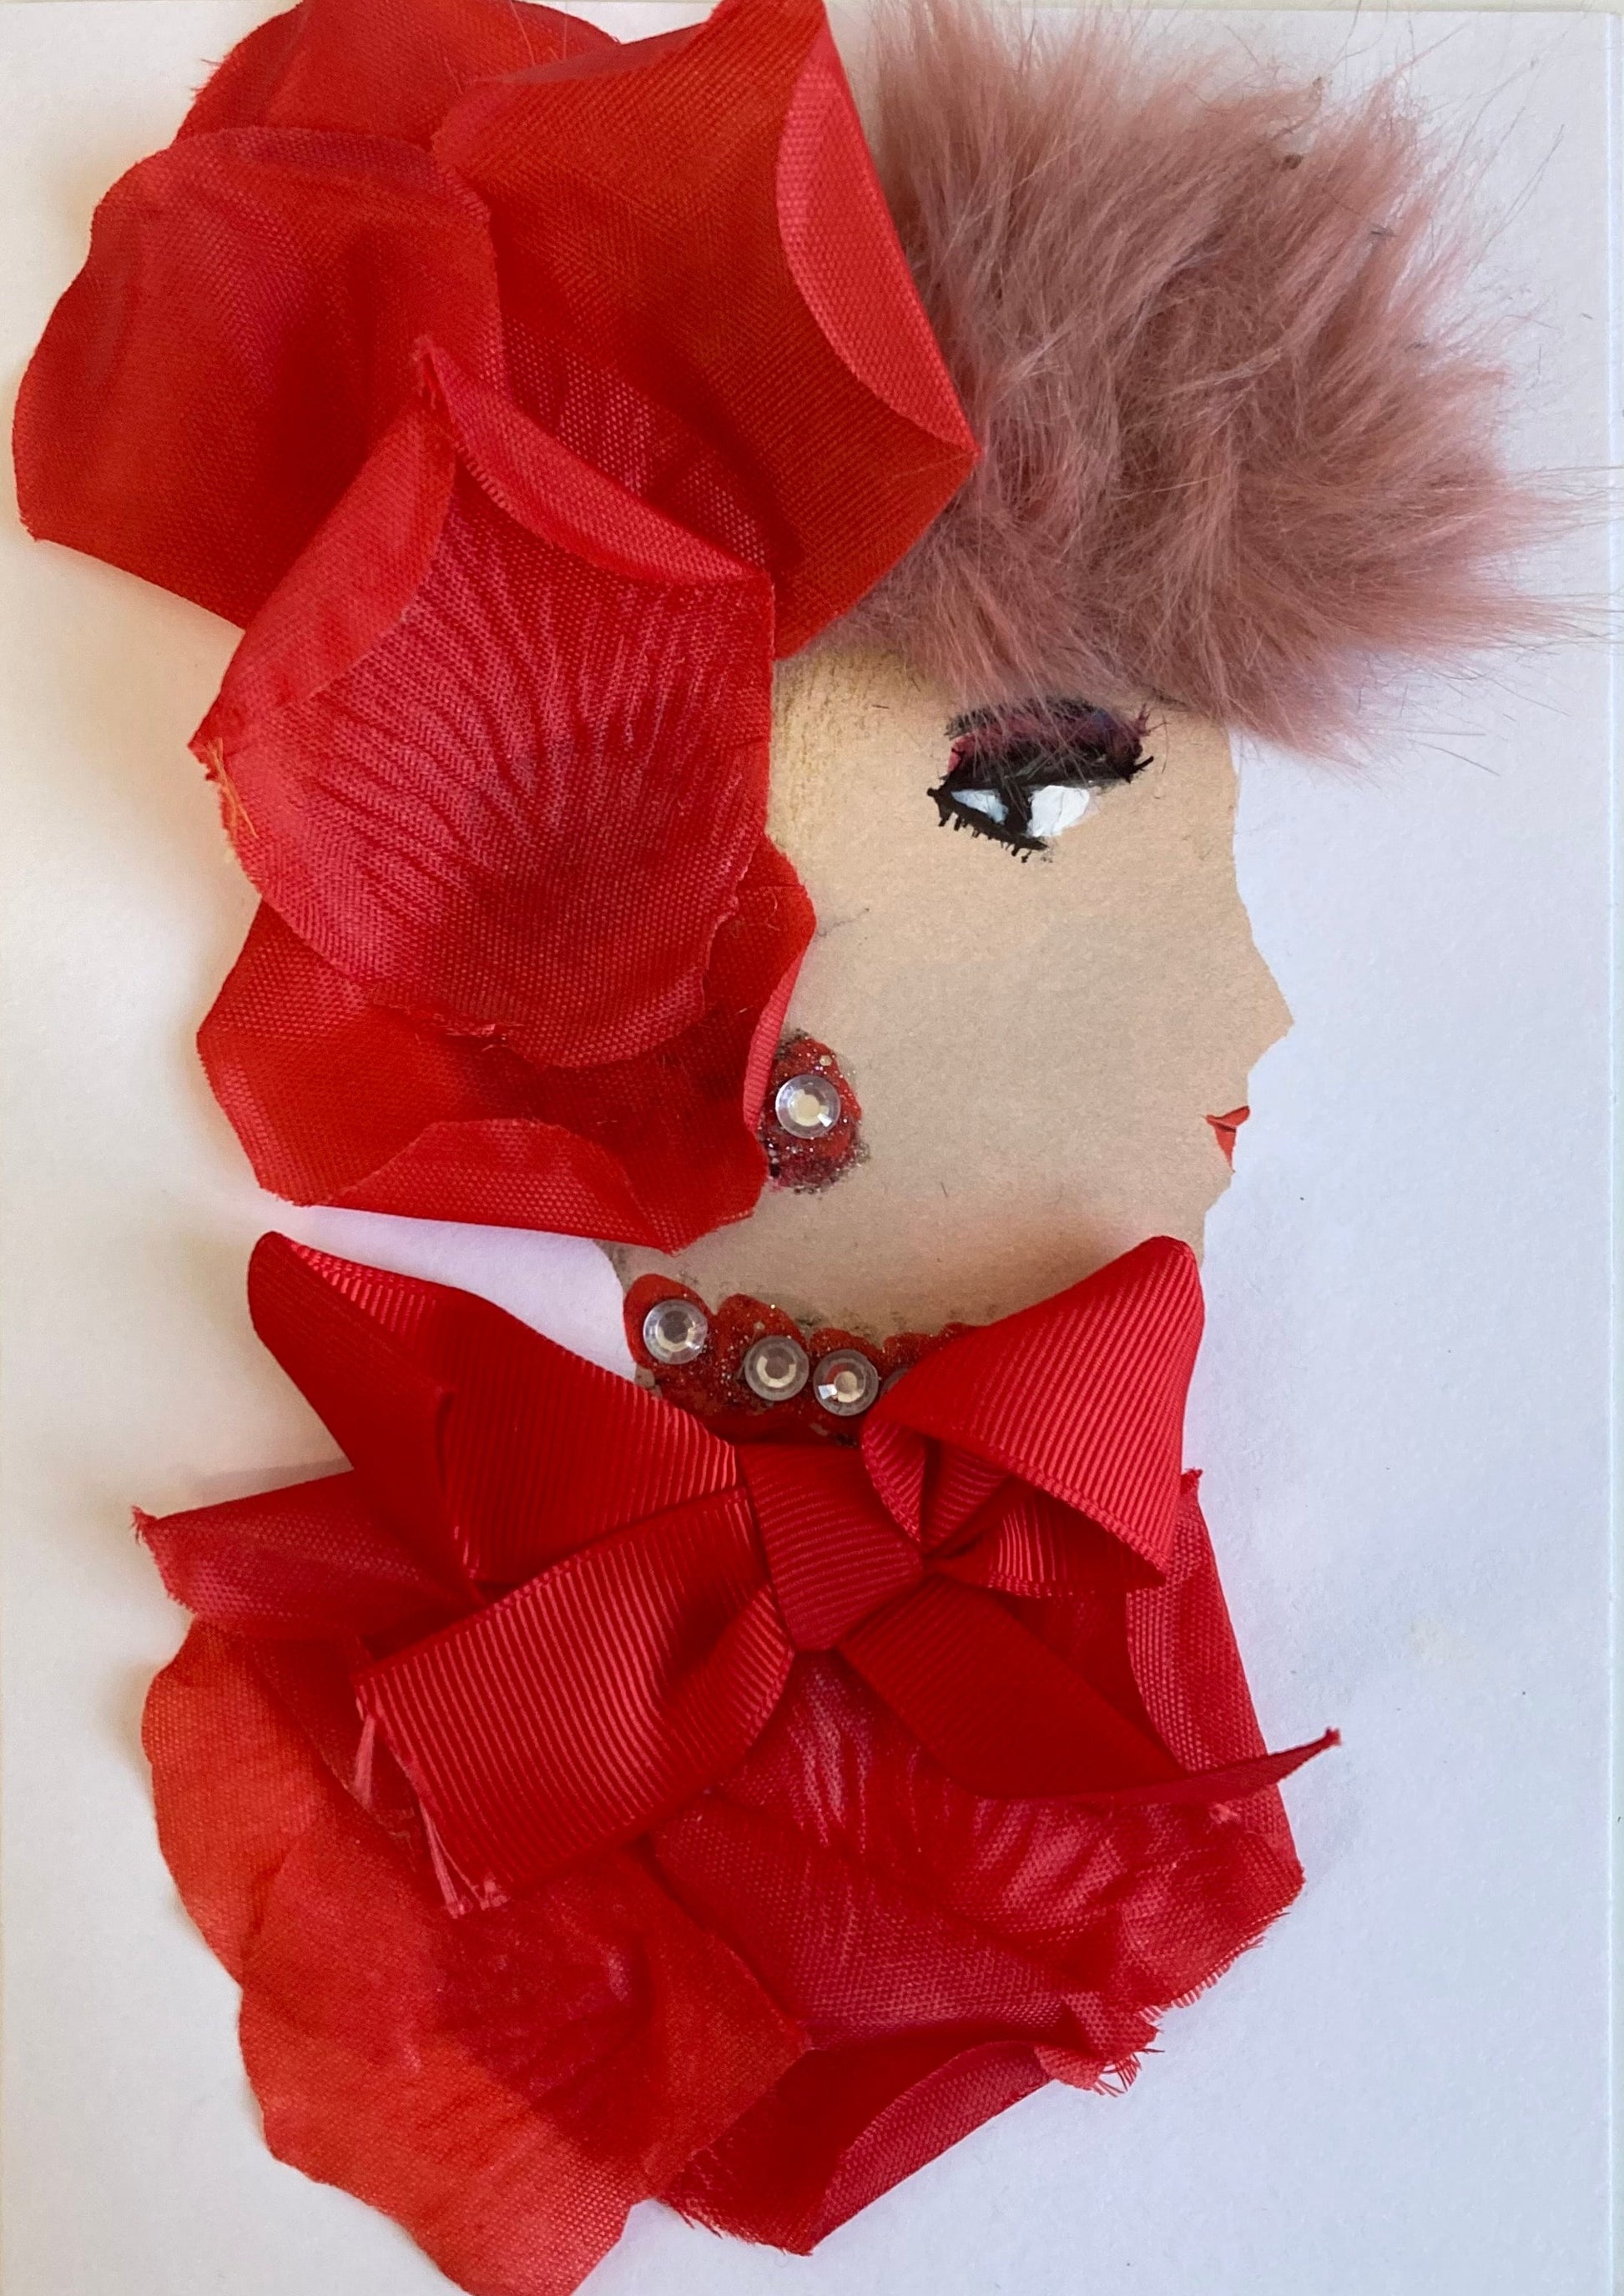 This card has been given the name Penelope Piccadilly. She wears red rose petals in her pink furry hair and as her blouse, which also has a large red bow on it. 